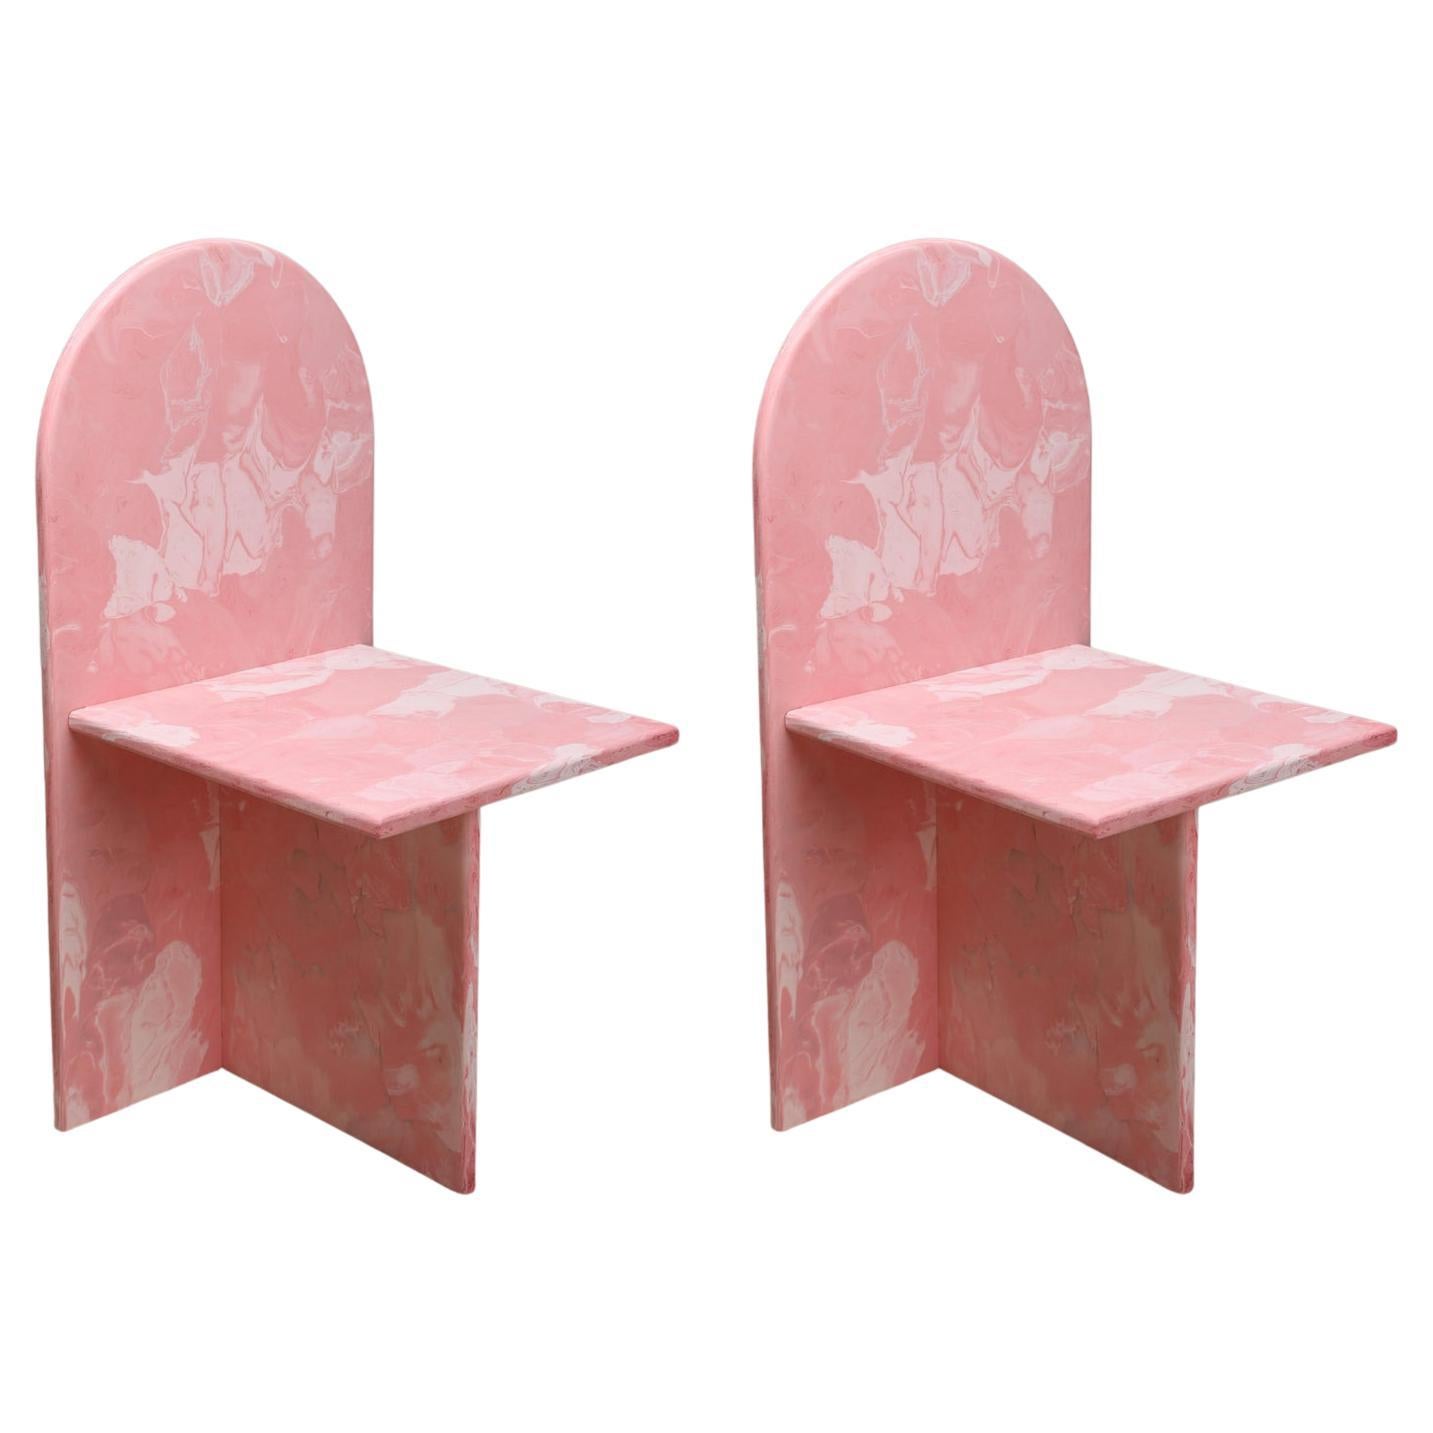 2x Contemporary Chairs Pink 100% Recycled Plastic Hand-Crafted by Anqa Studios